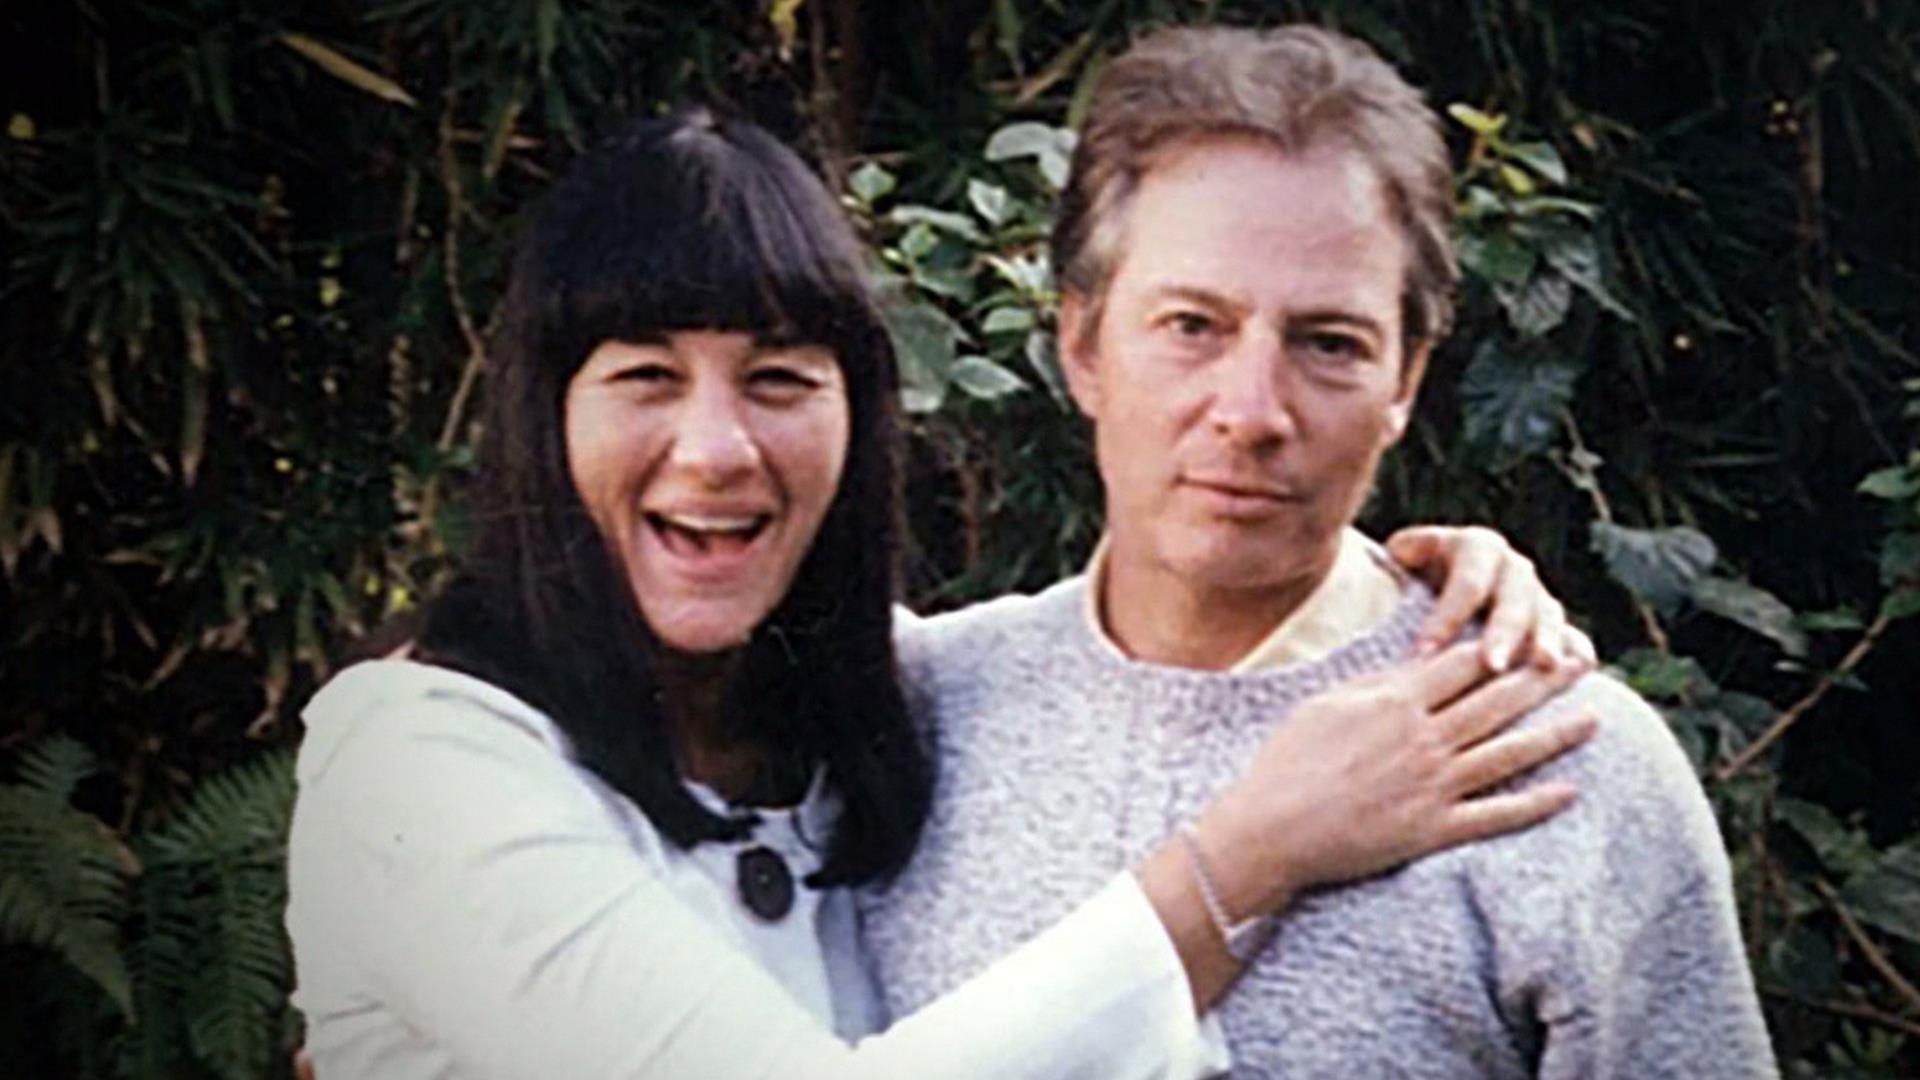 Robert Durst and Susan Berman, the daughter of a Las Vegas mobster who was found face down in an LA pool.